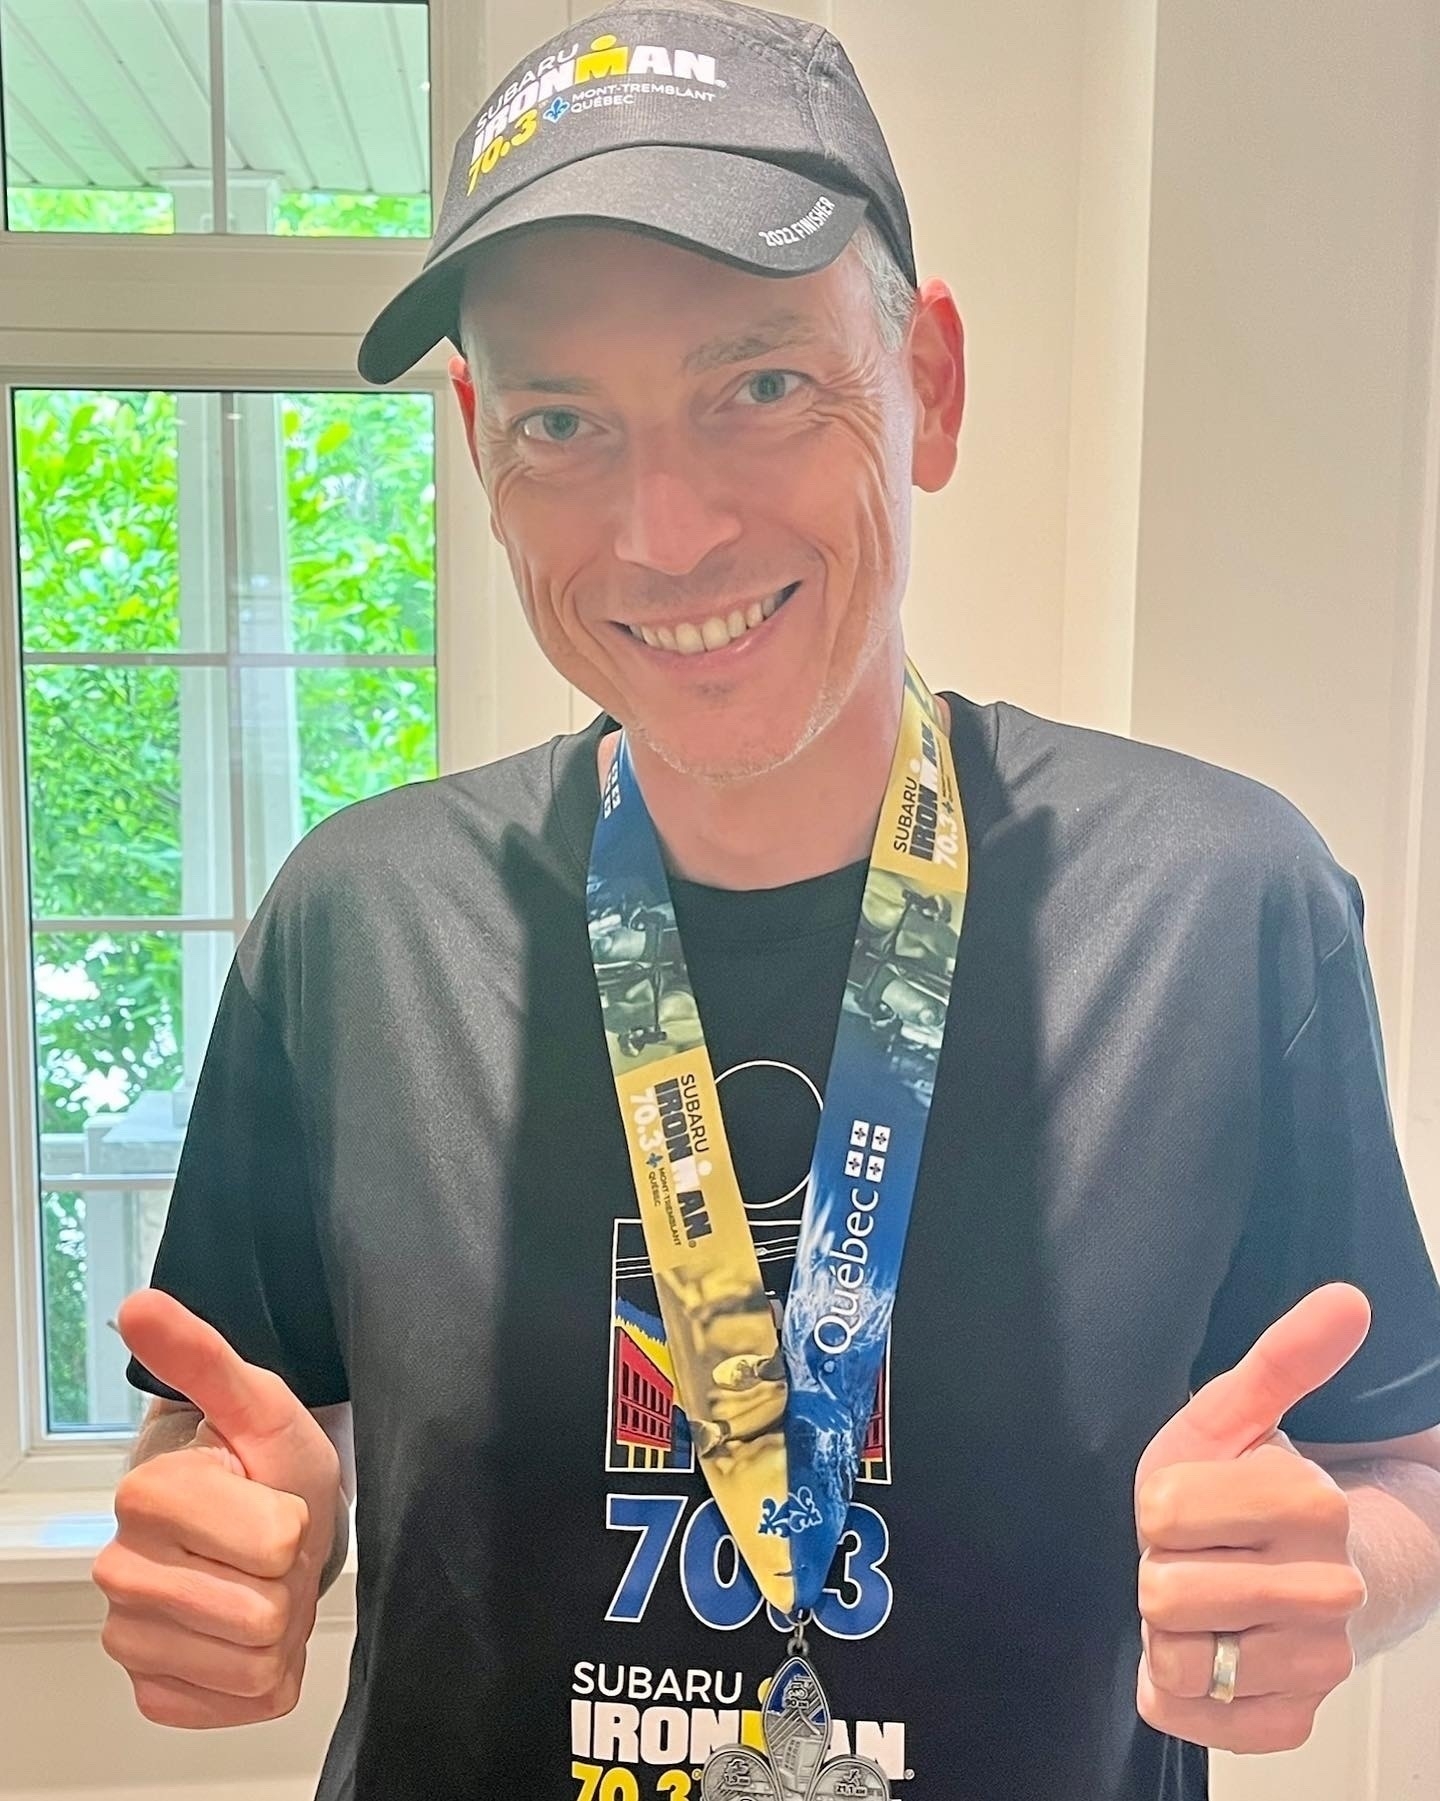 Me wearing all the event swag (hat, shirt, and medal) with two thumbs up